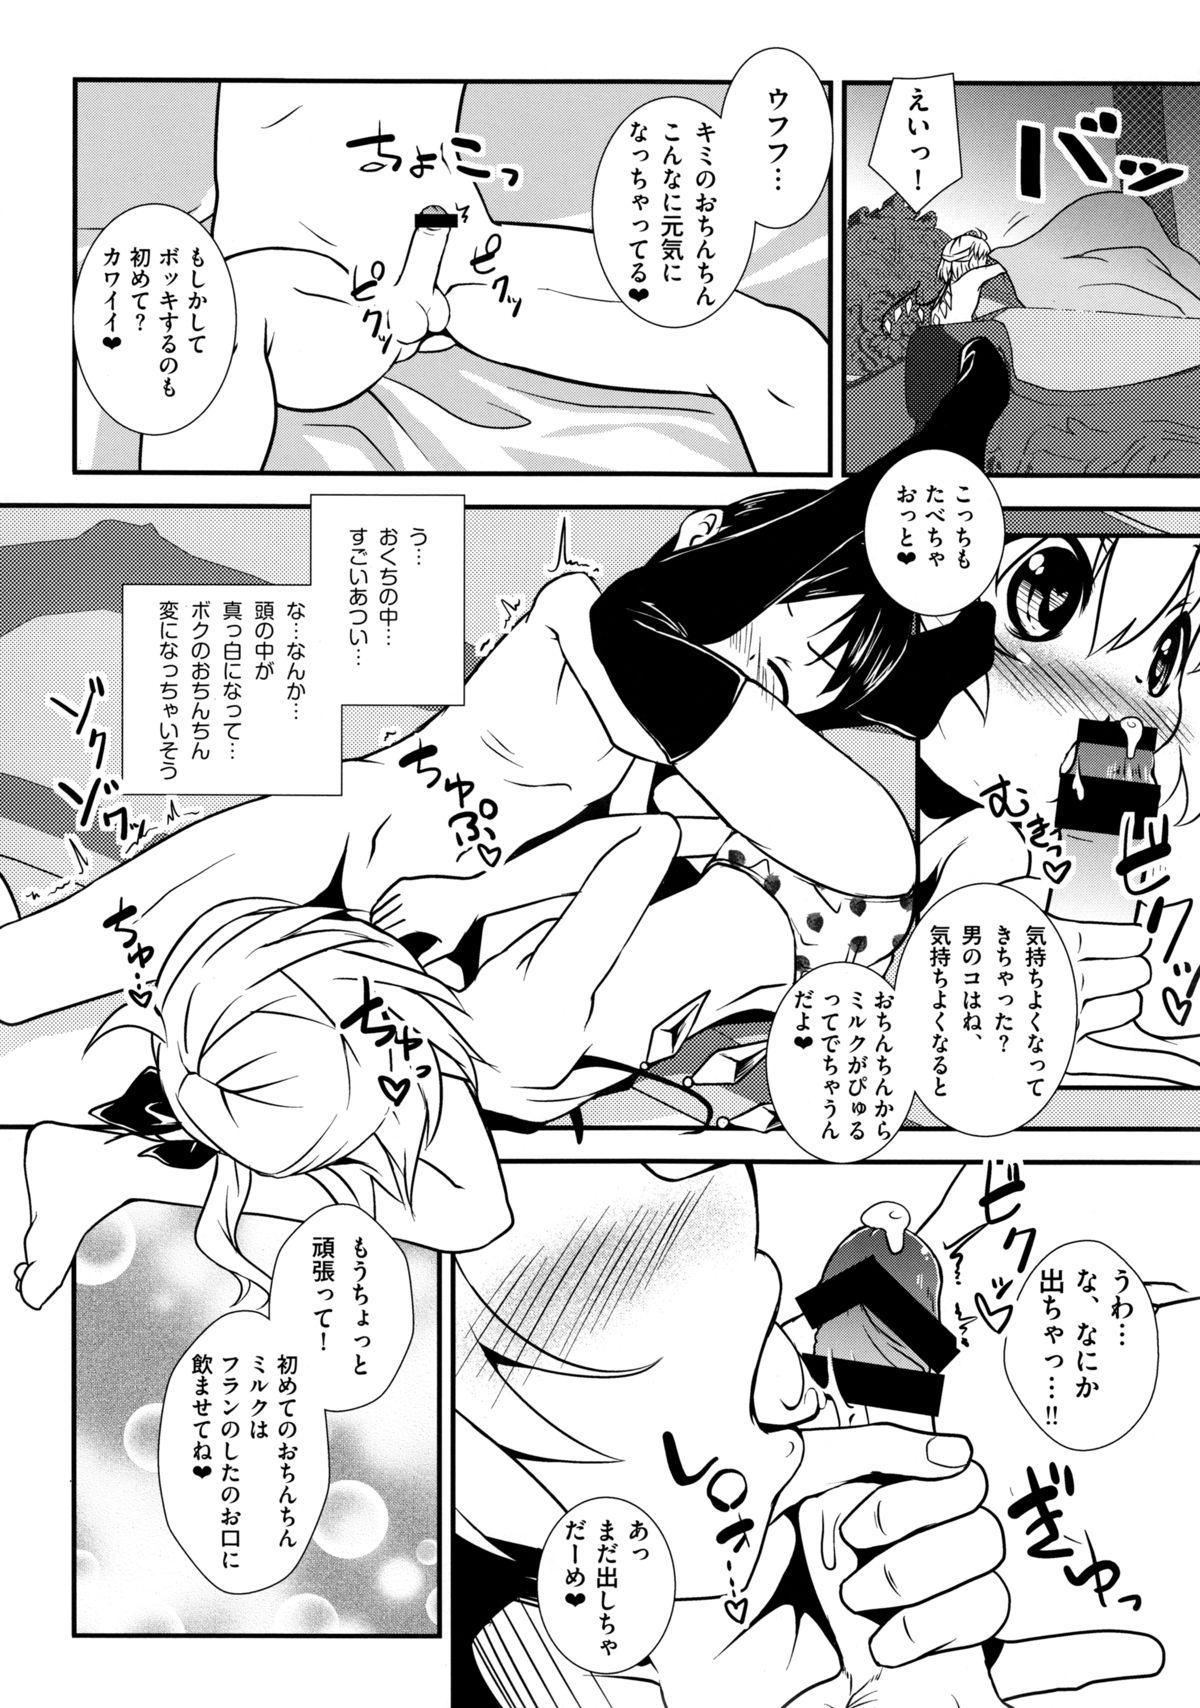 Super Ichigo Milk to Flan-chan. - Touhou project Tight Cunt - Page 11